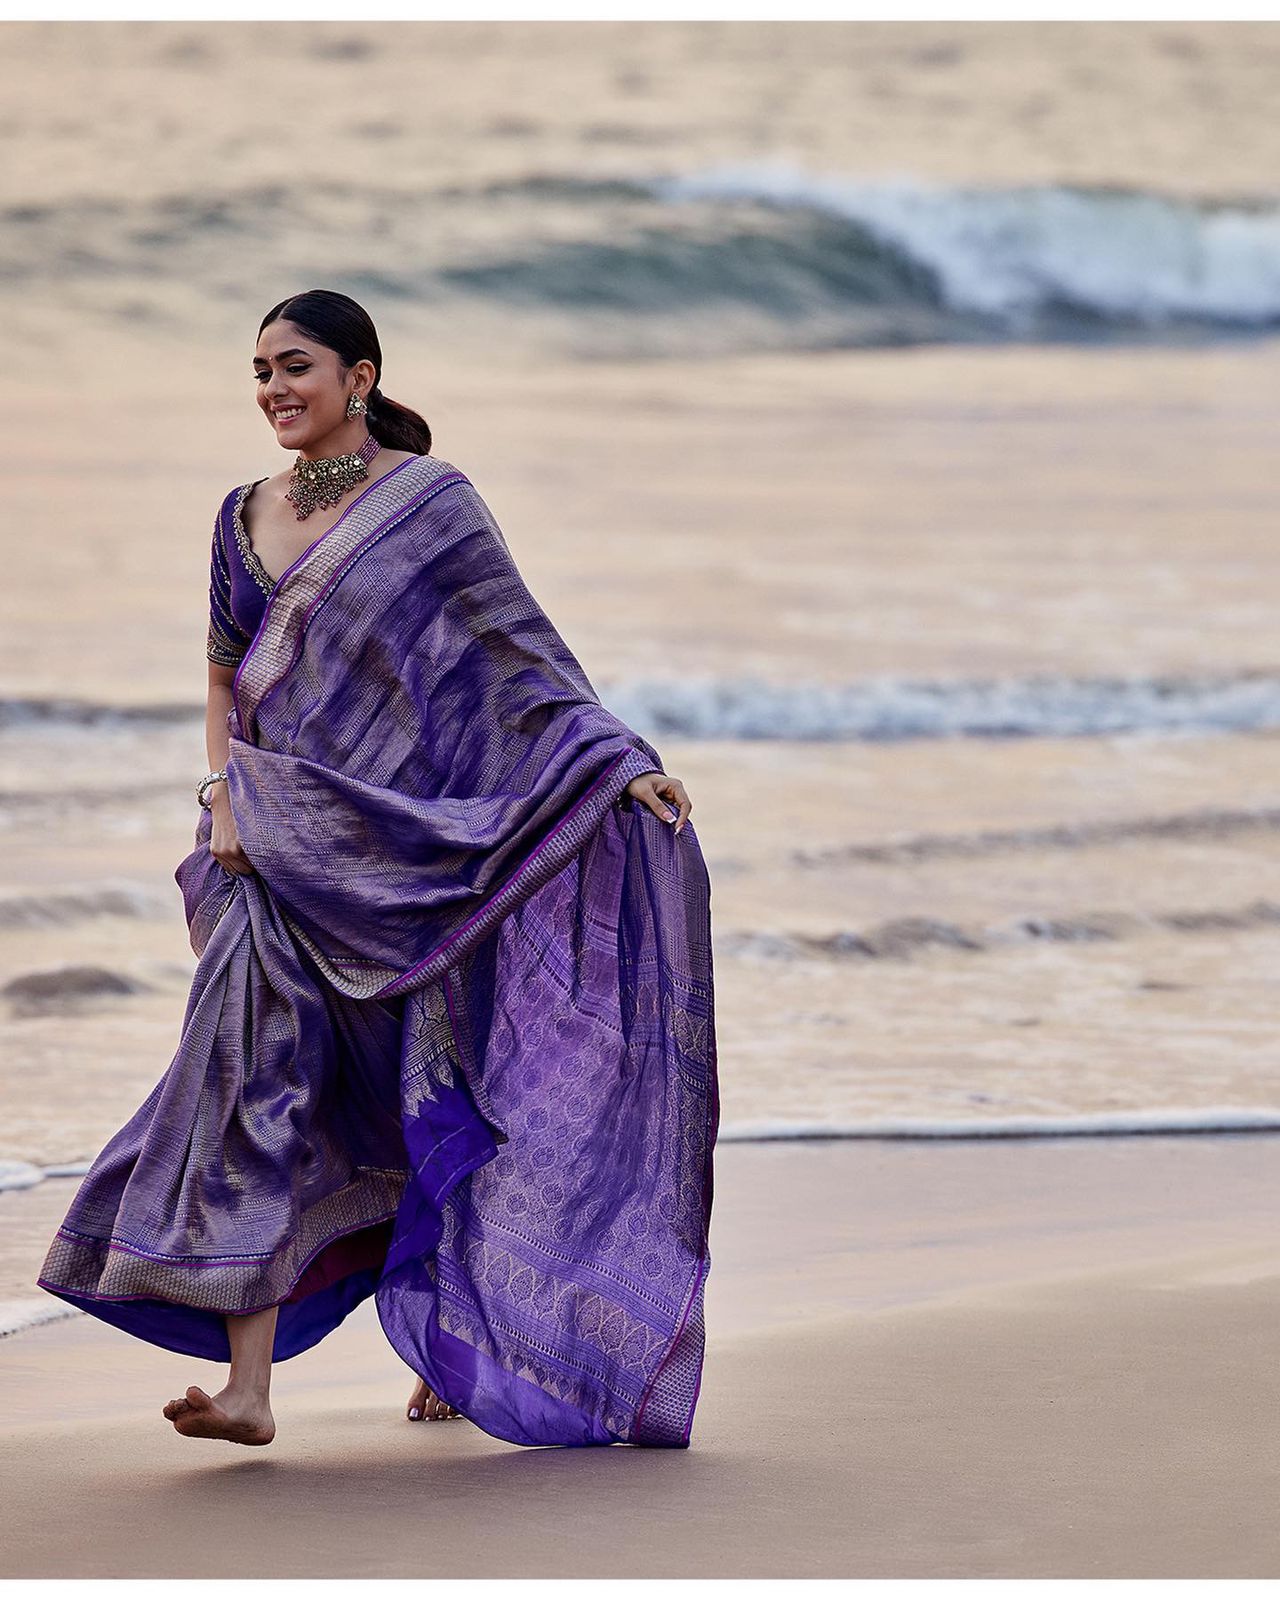 Mrunal Thakur's First Look From The Pan India Film Nani 30 OUT